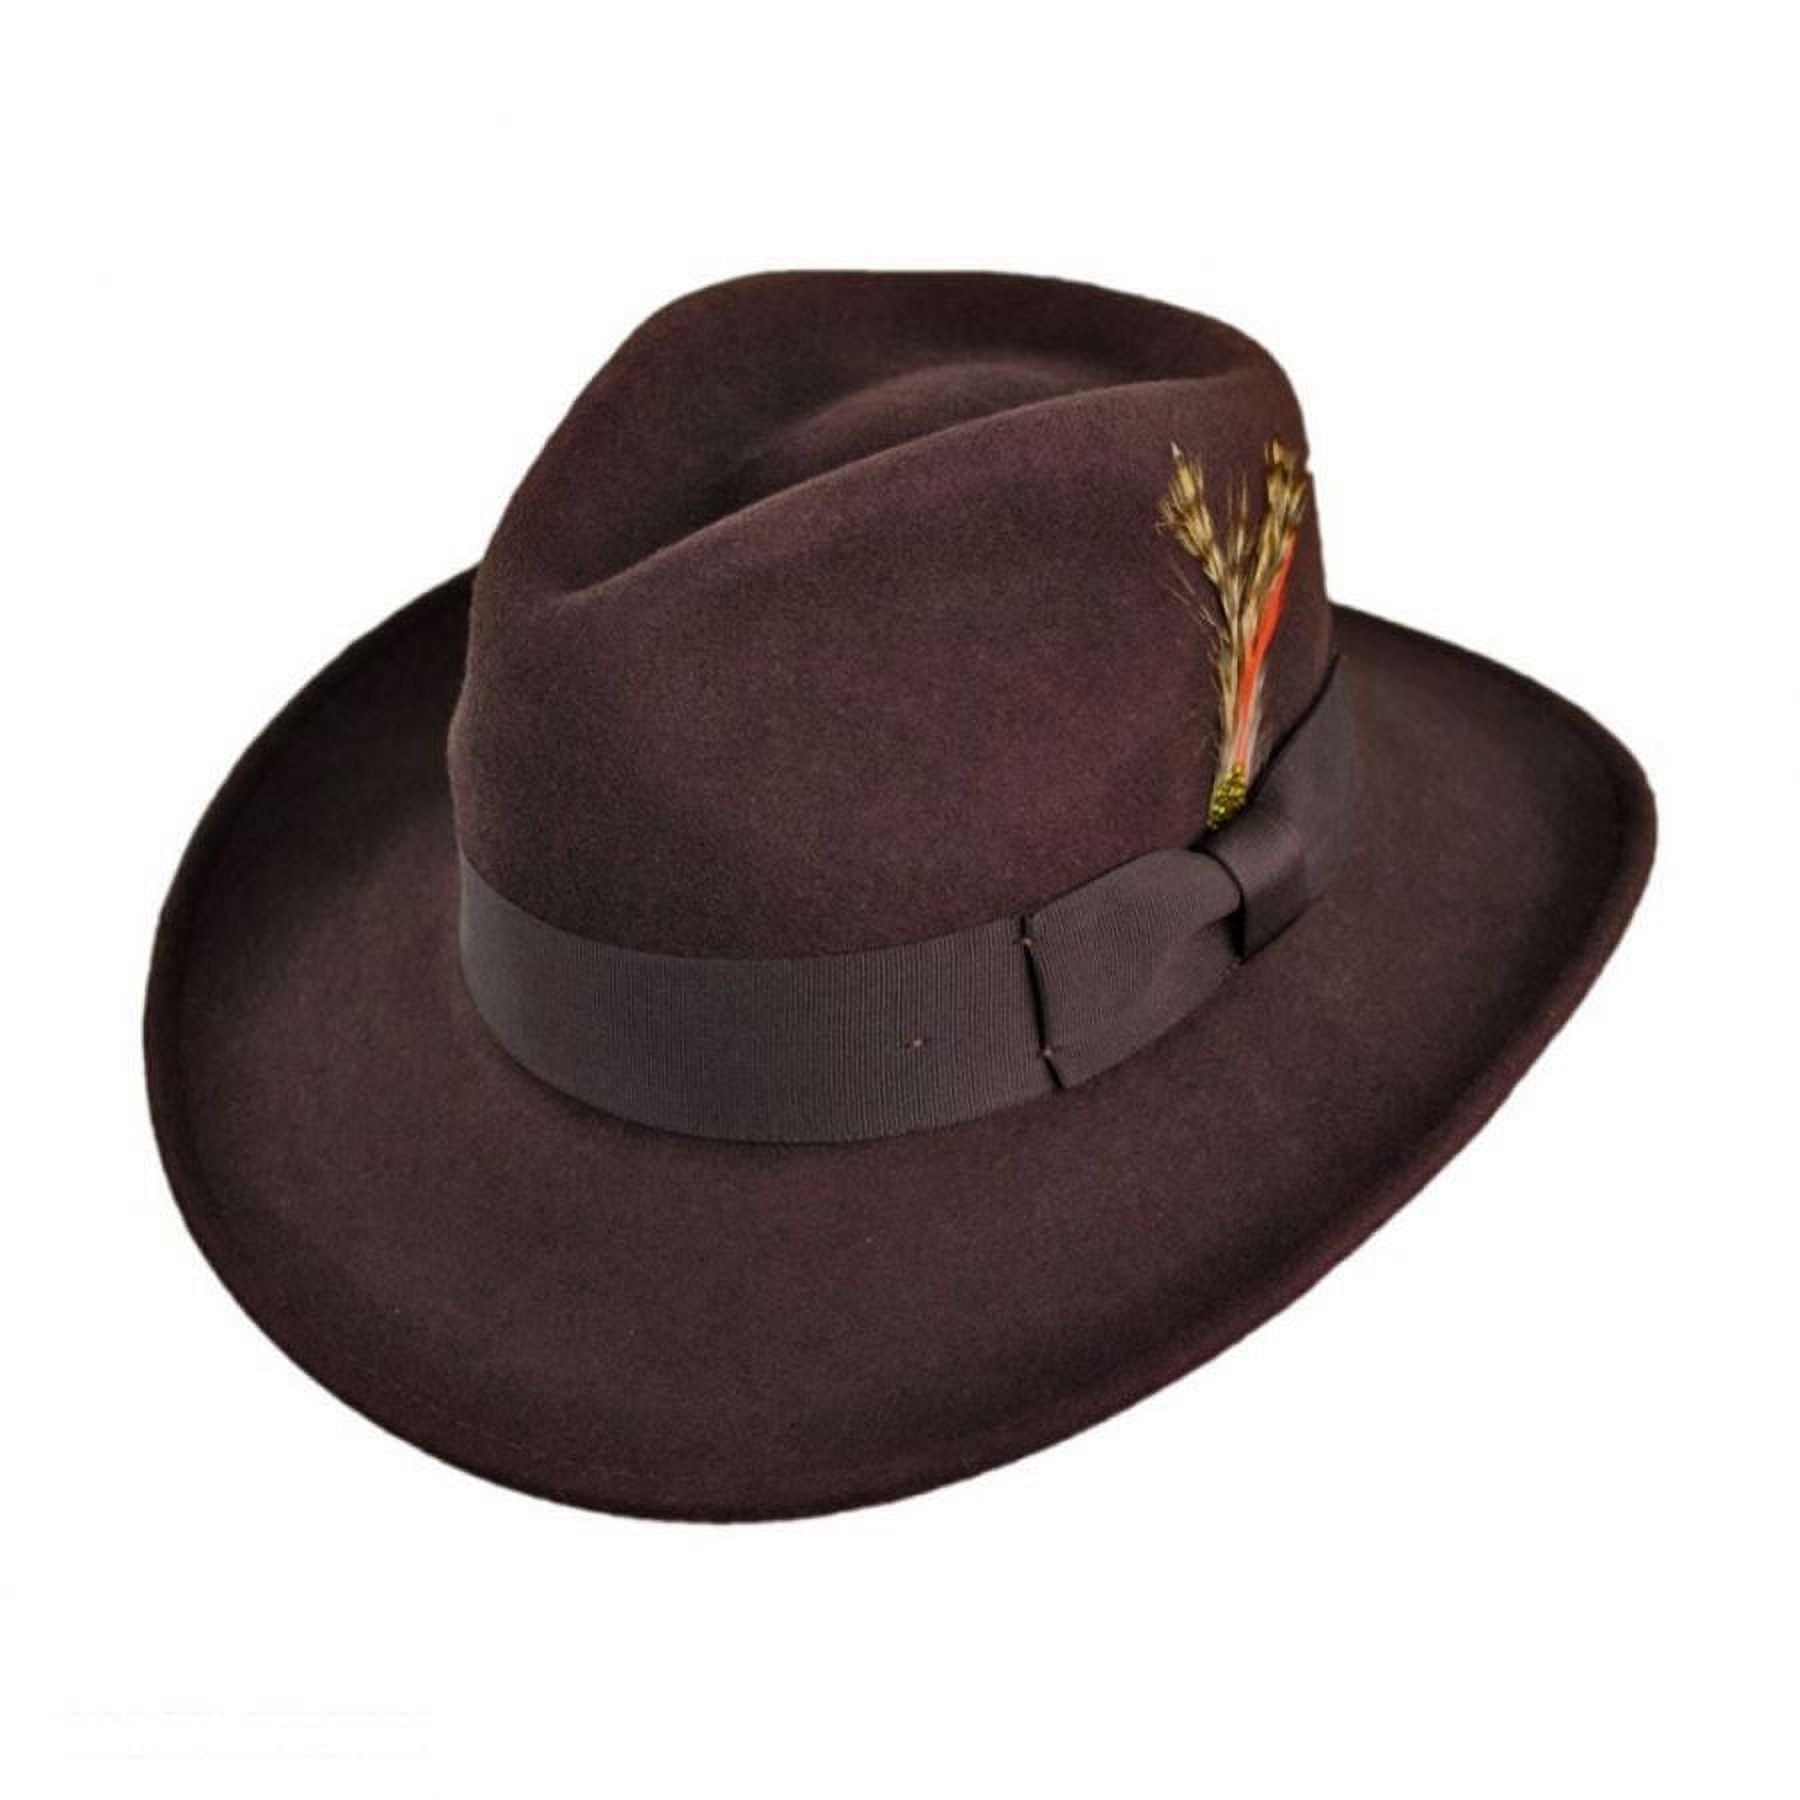 Ford Crushable Wool Felt Fedora Hat - S - Brown - image 1 of 7